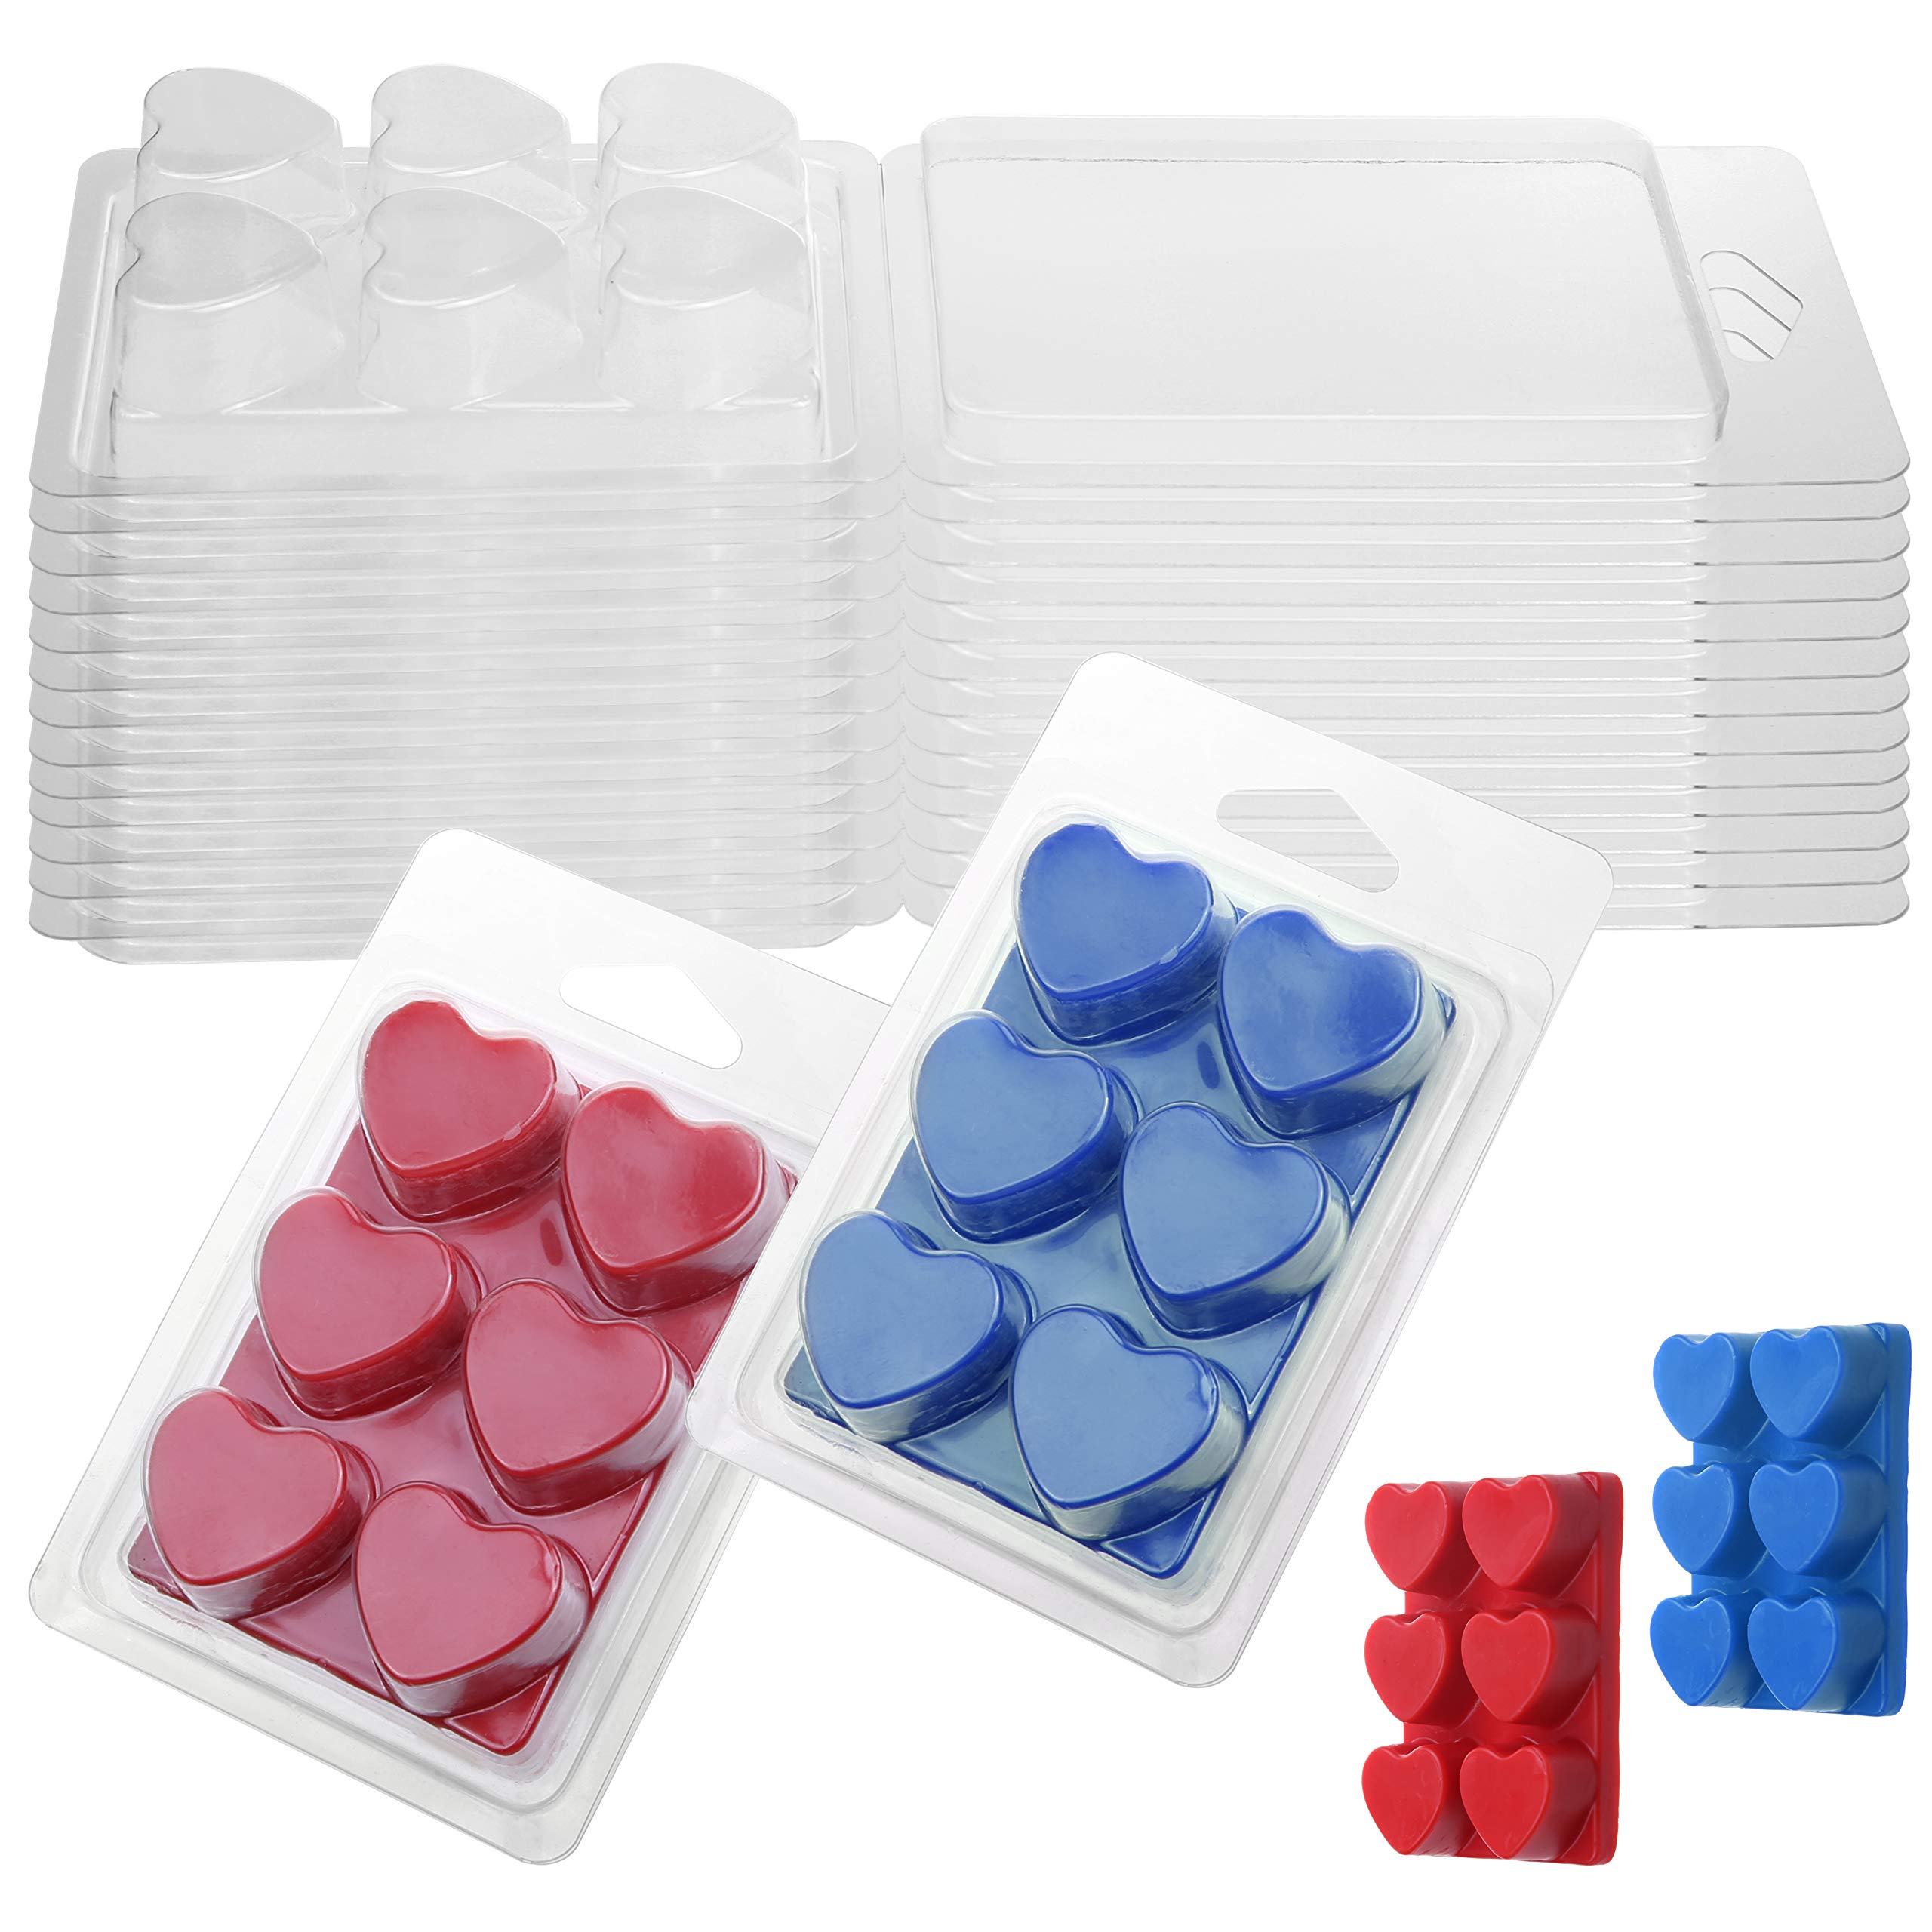 MILIVIXAY Wax Melt Containers-6 Cavity Clear Empty Plastic Wax Melt Molds-100 Packs Round Clamshells for Tarts Wax Melts.